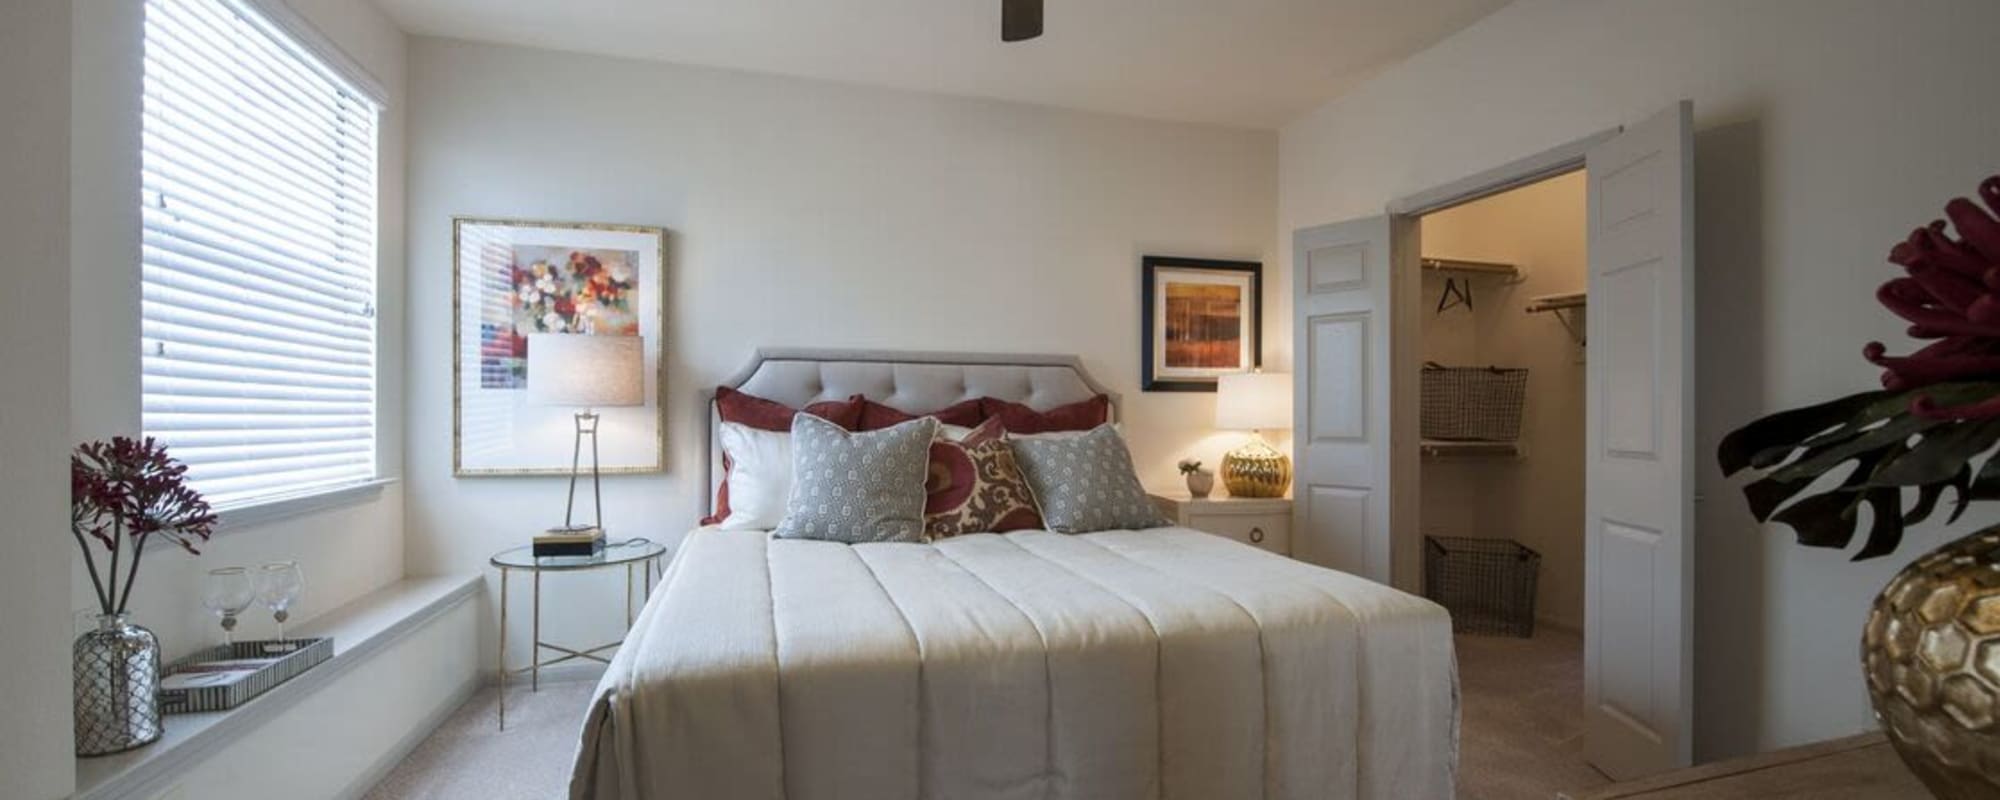 Master apartment bedroom with art on the walls and a walk in closet at The Crossing at Katy Ranch in Katy, Texas